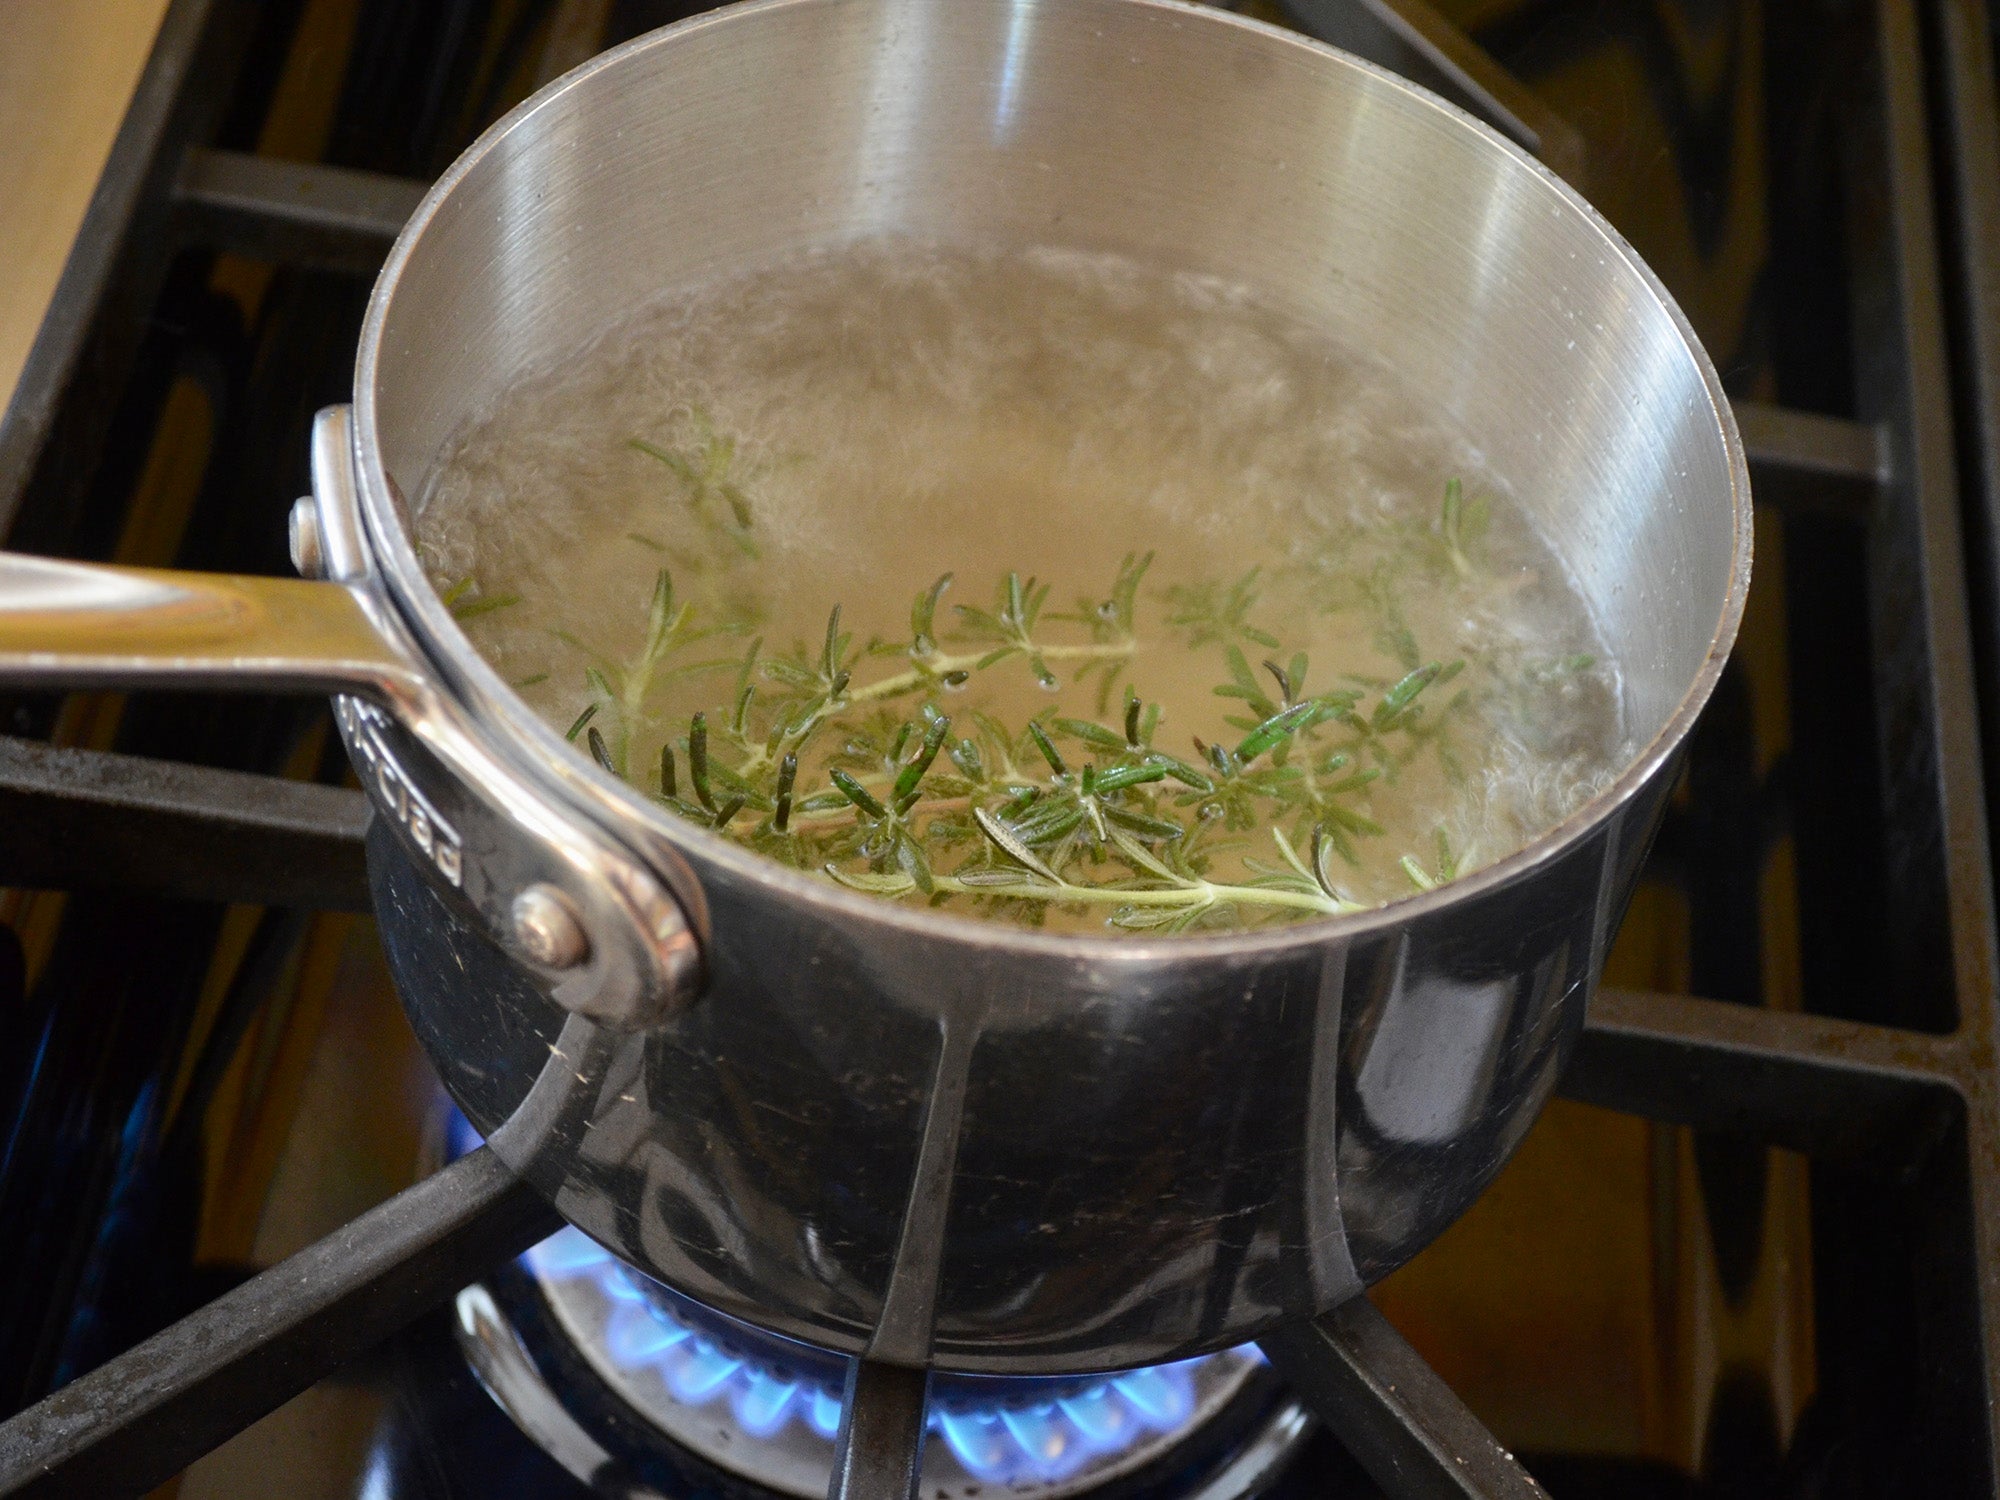 Grow long and healthy hair with this DIY rosemary water | Popular Science